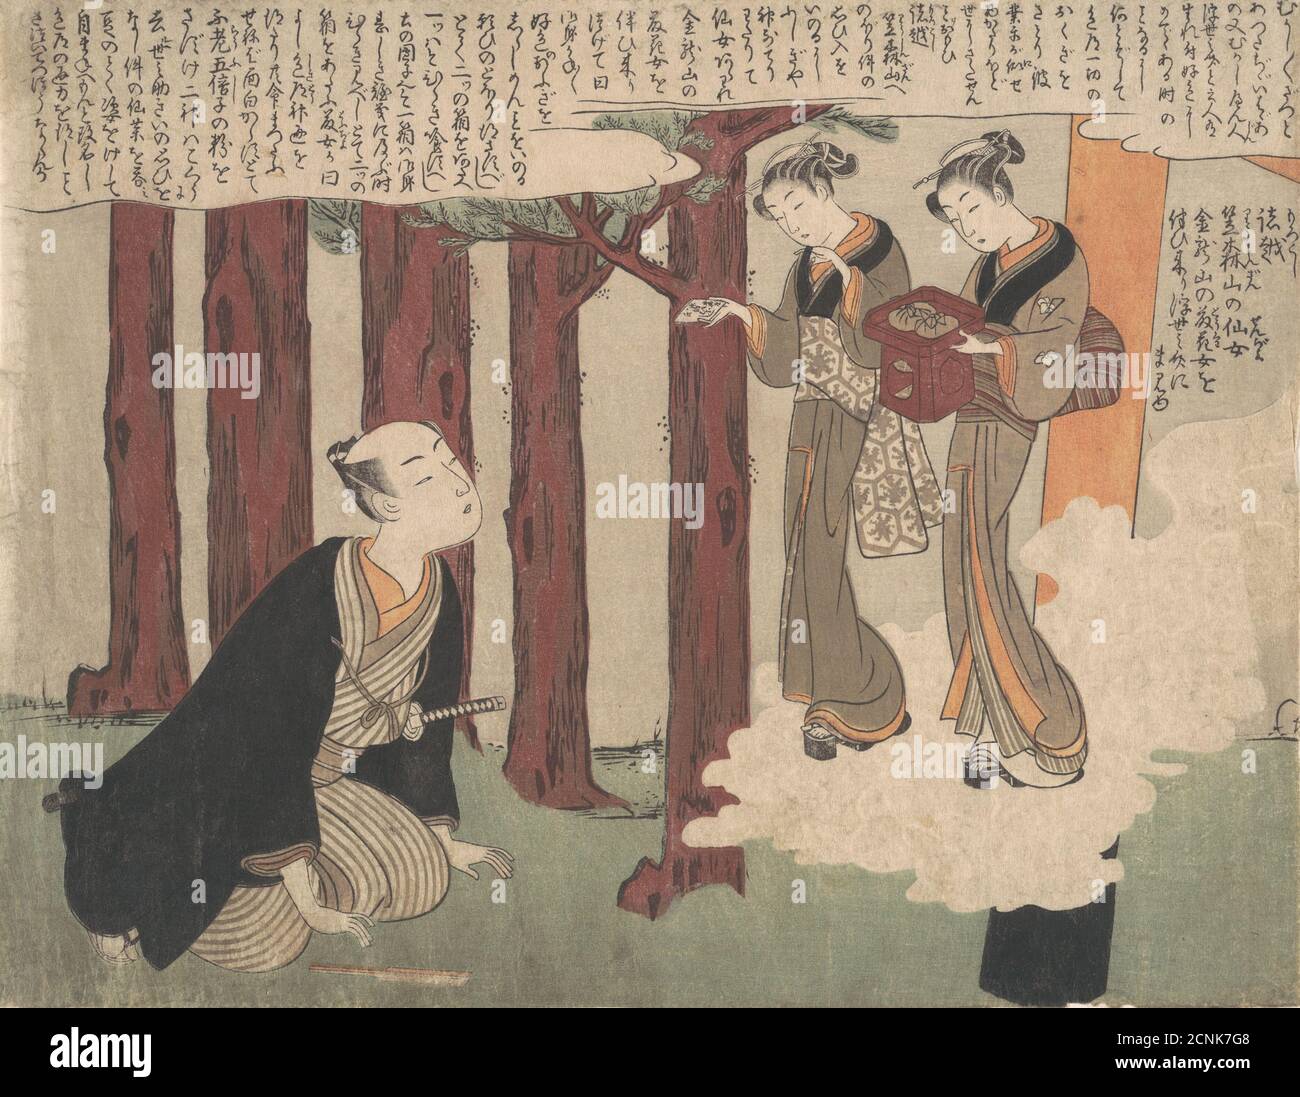 First Leaf of the Shunga; The Delightful Love Adventures of Maneyemon, ca. 1769. Stock Photo